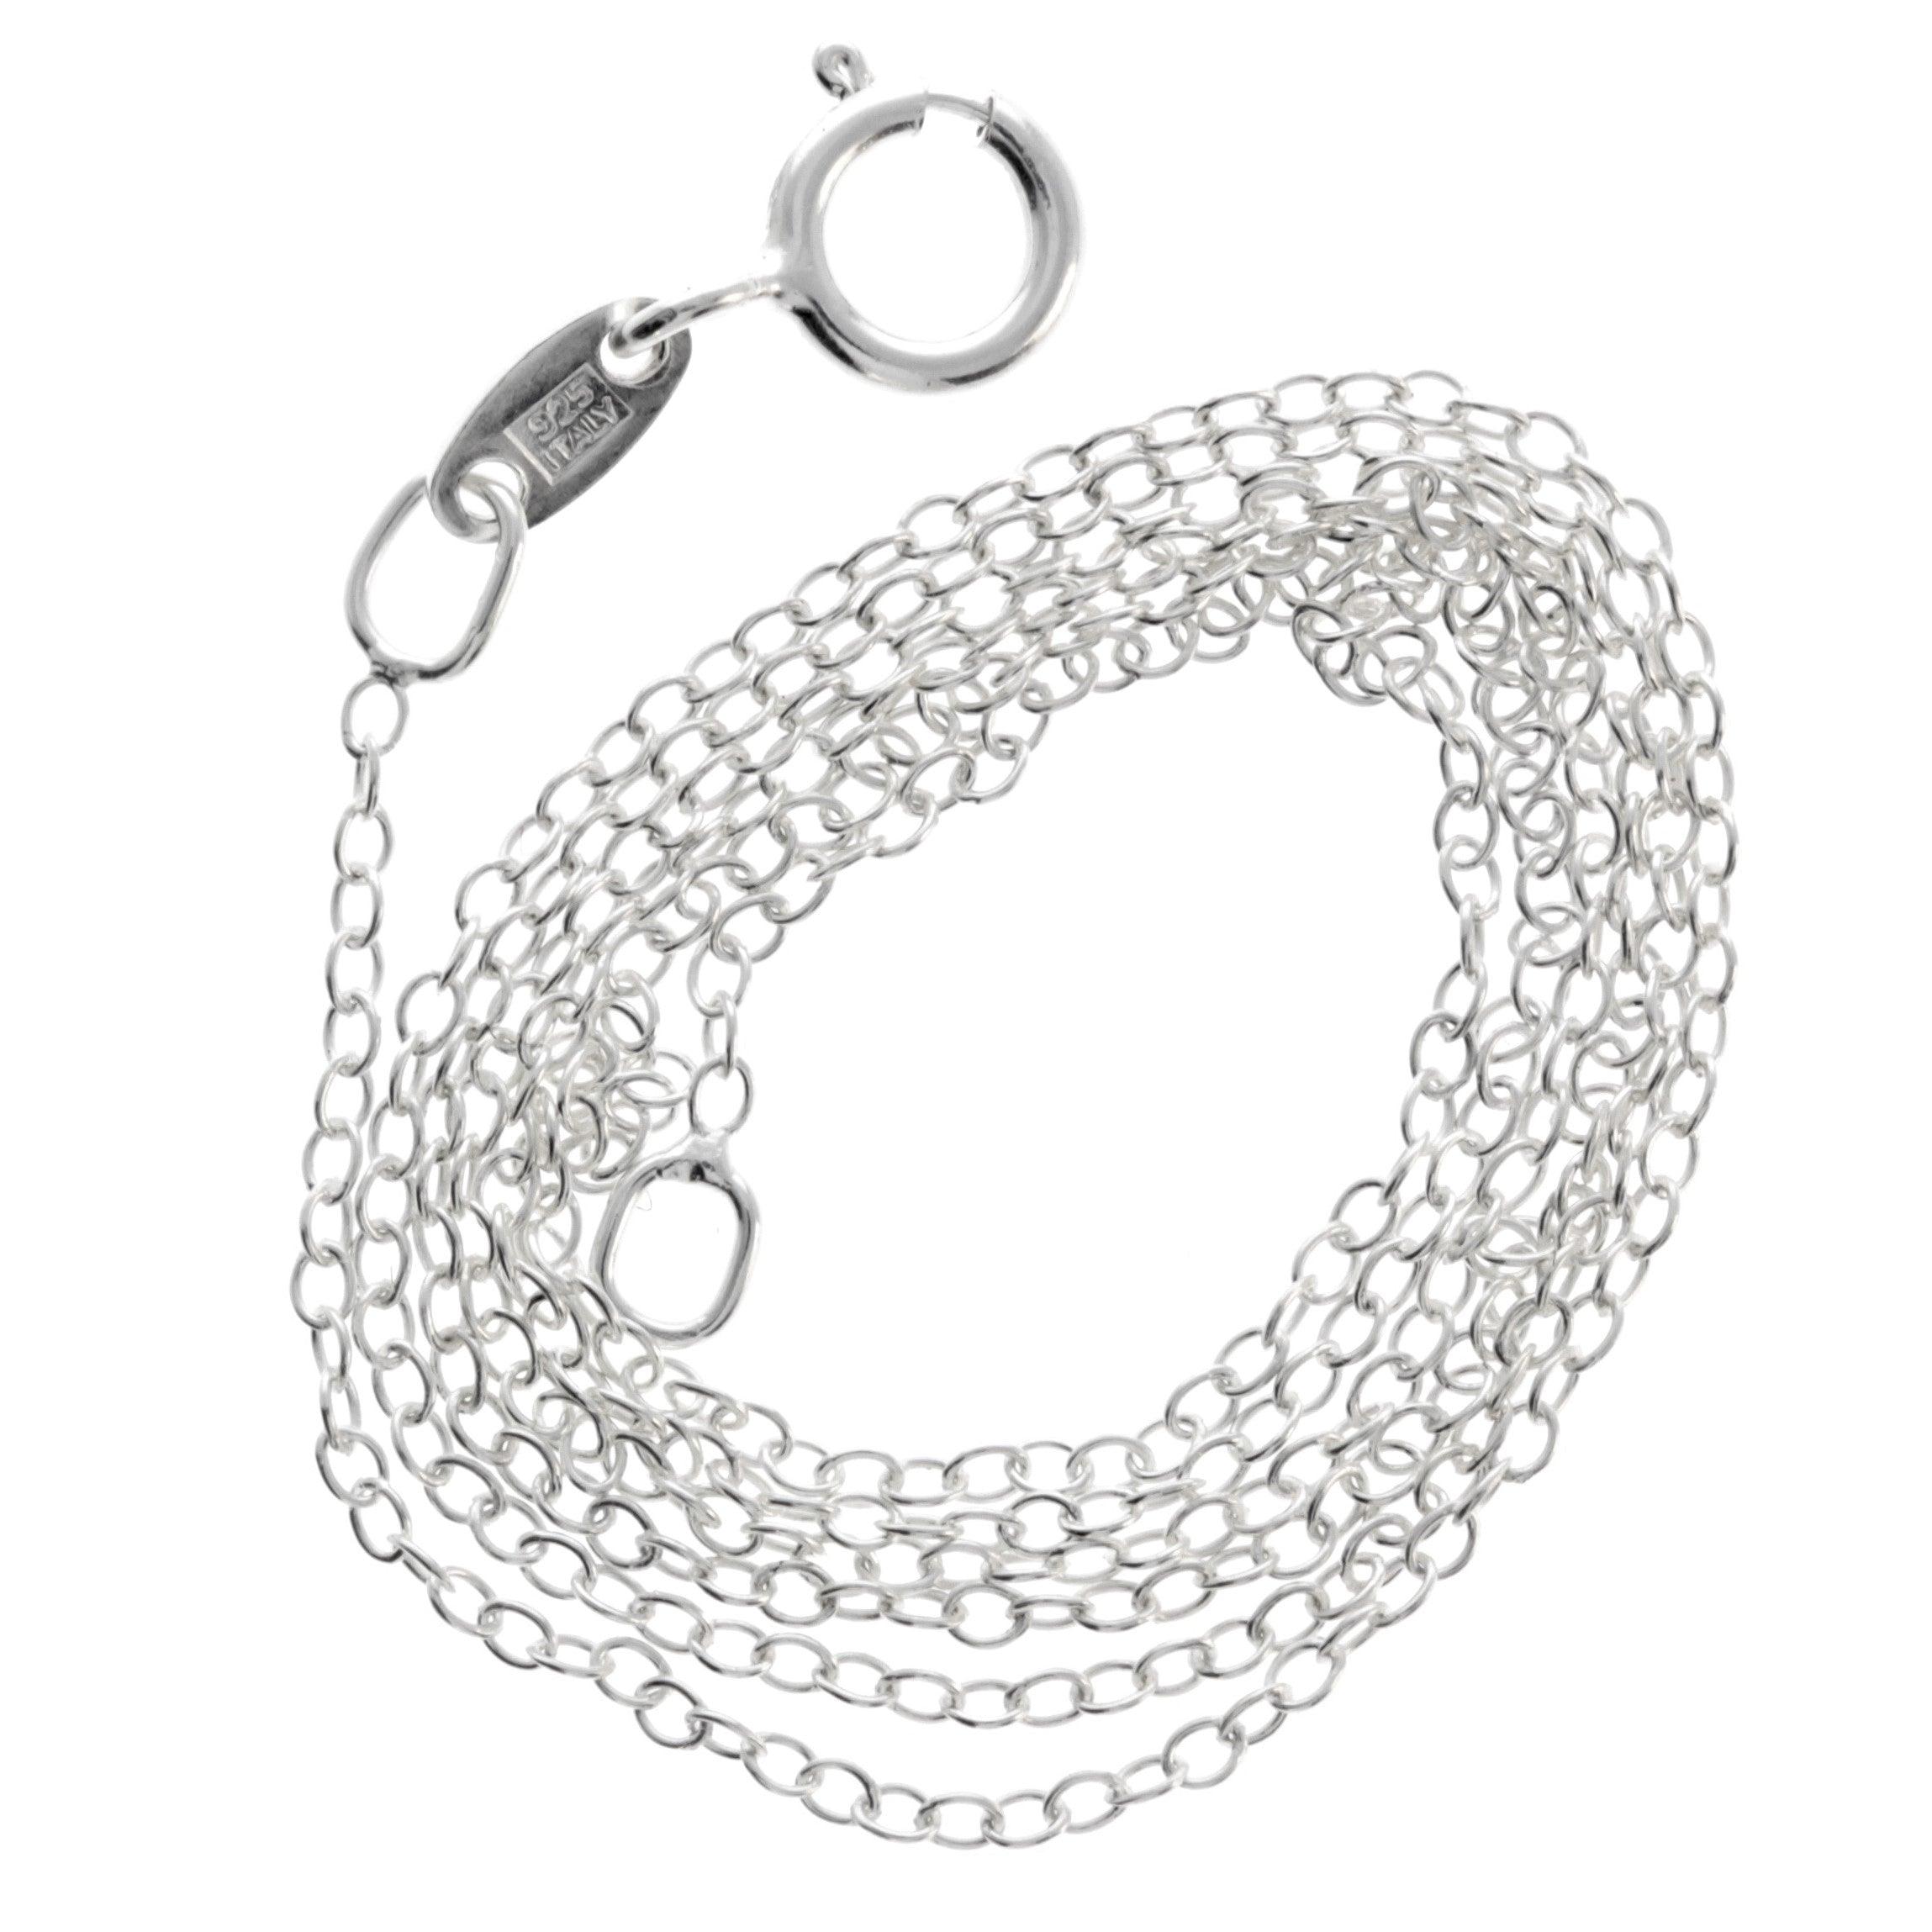 Selection of best quality 925 sterling silver Italy Chains - SilverAmberJewellery